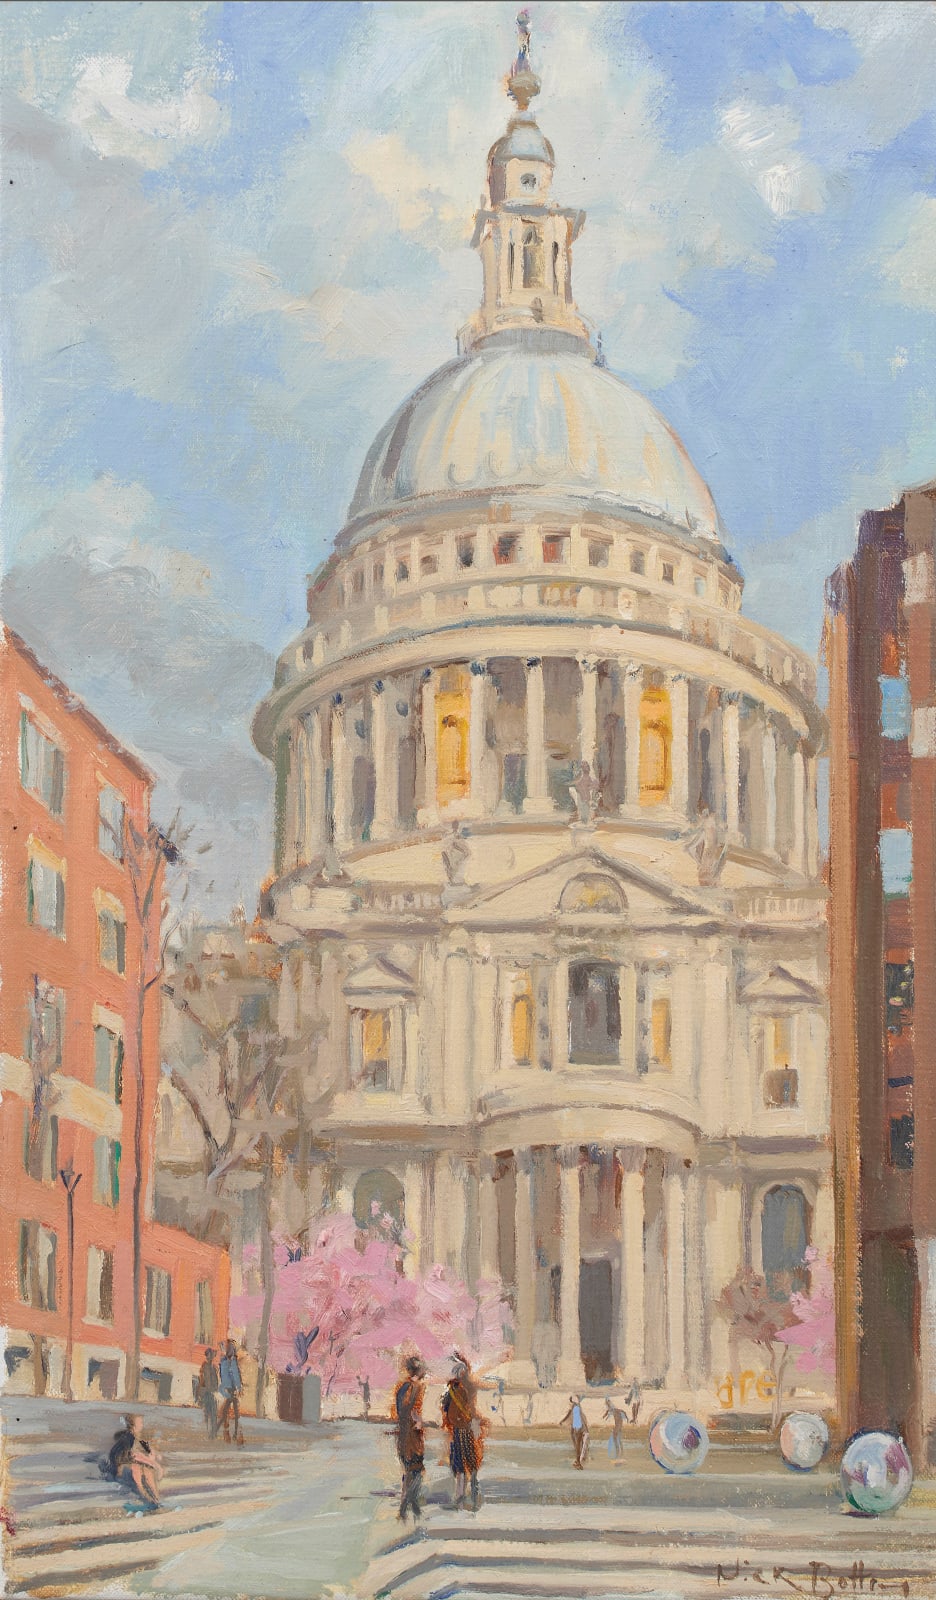 Nick Botting, St. Paul's with Blossom